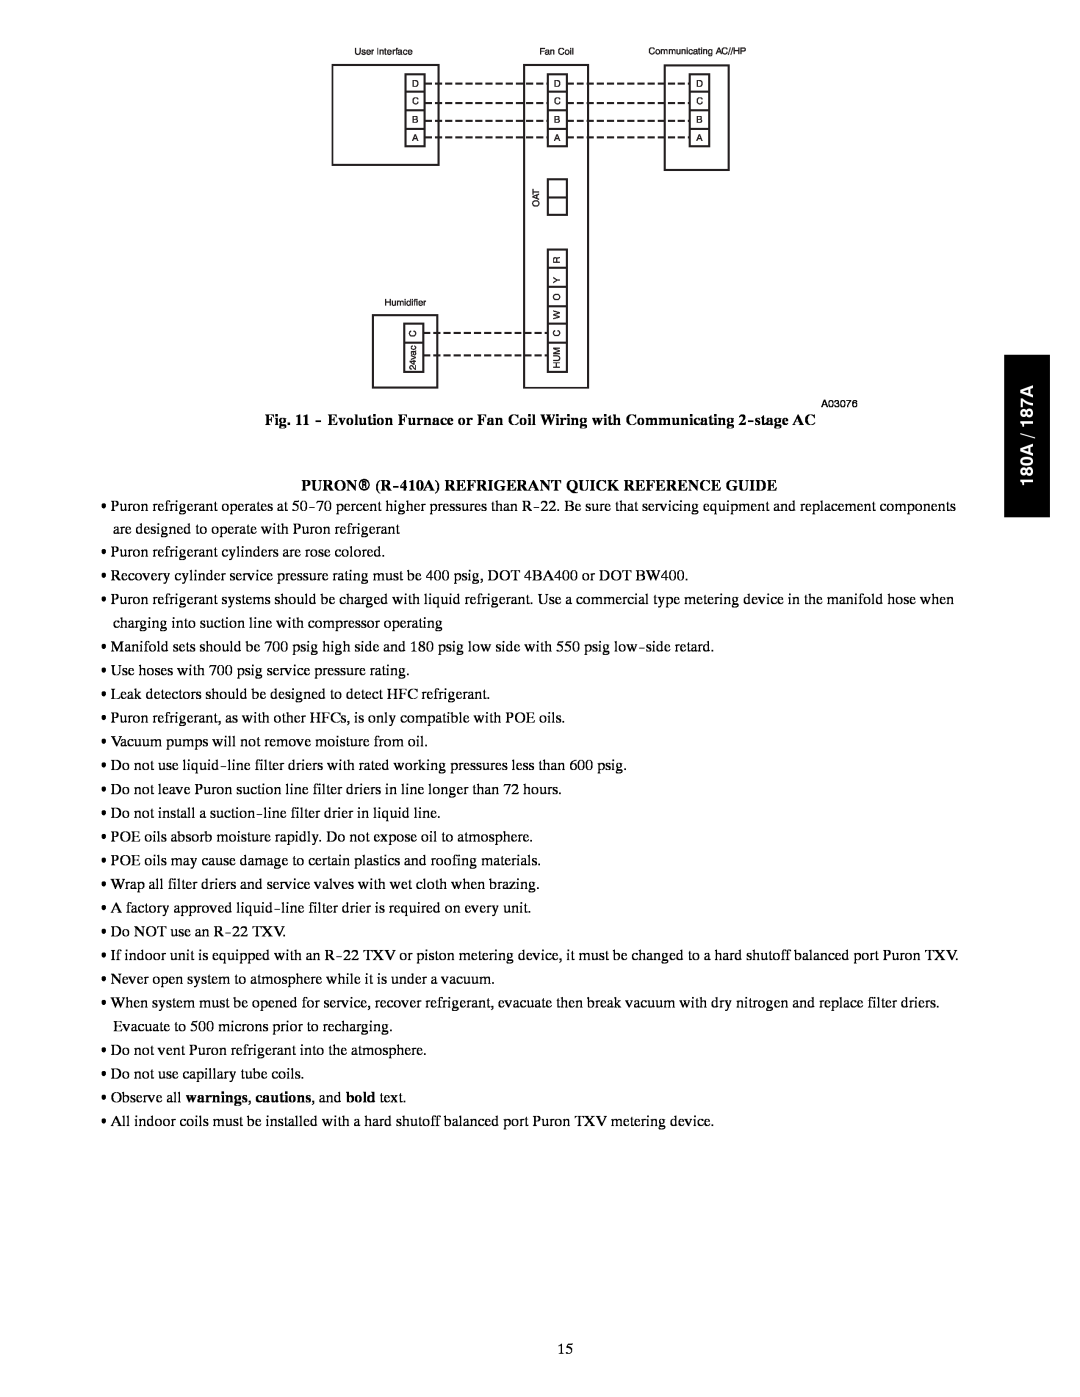 Bryant installation instructions PURONR R-410AREFRIGERANT QUICK REFERENCE GUIDE, 180A / 187A 